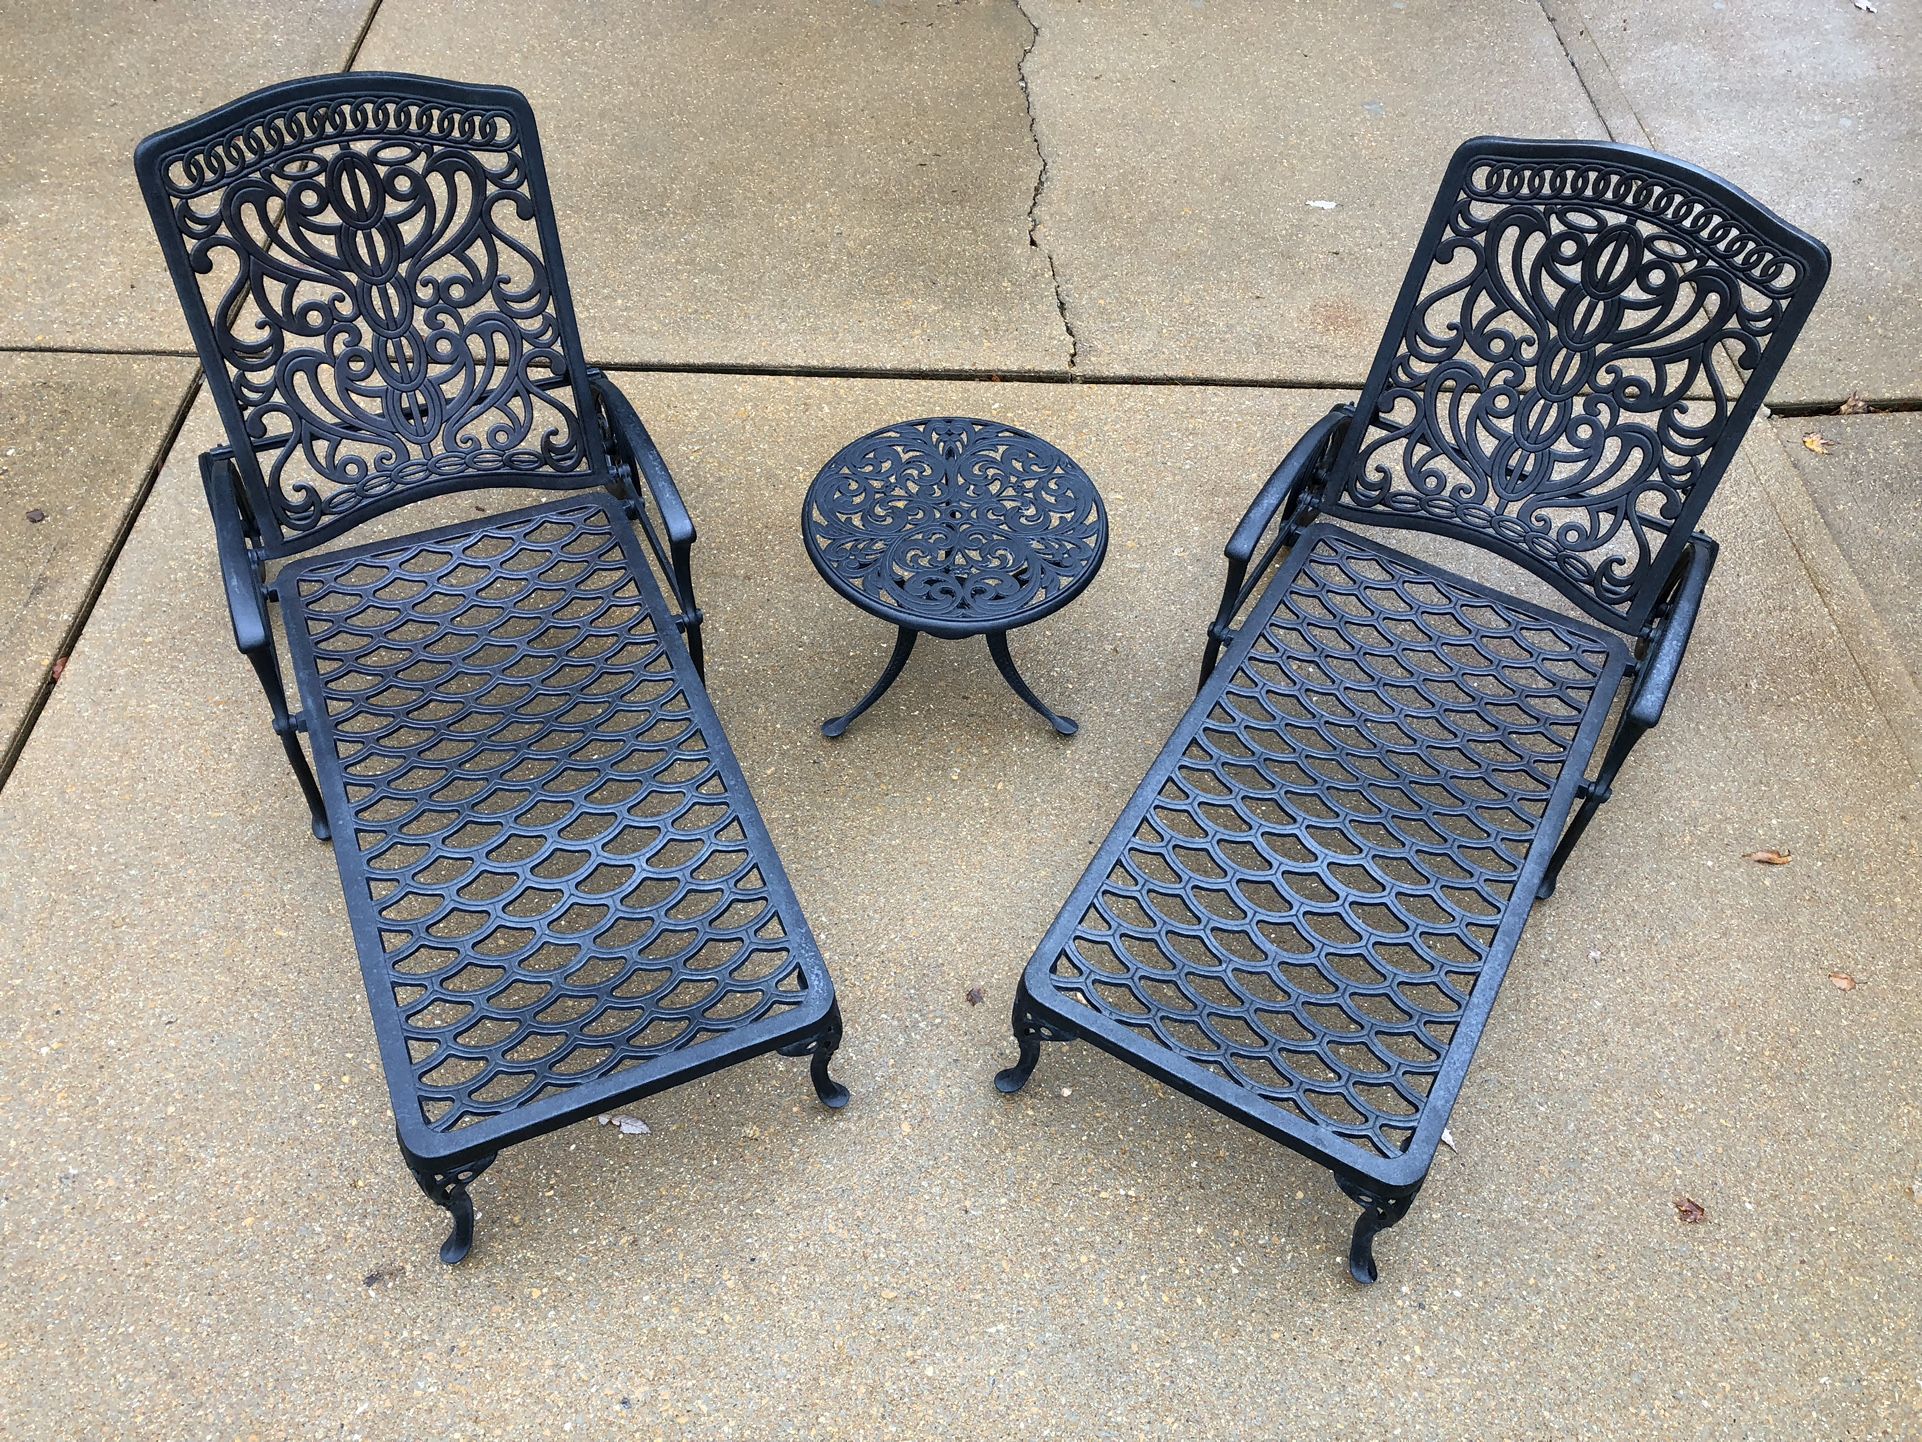 Hanamint Tuscany Outdoor Patio-Pool Furniture 2 Chaise Lounge Chairs-Table- Cast Aluminum-No Rust